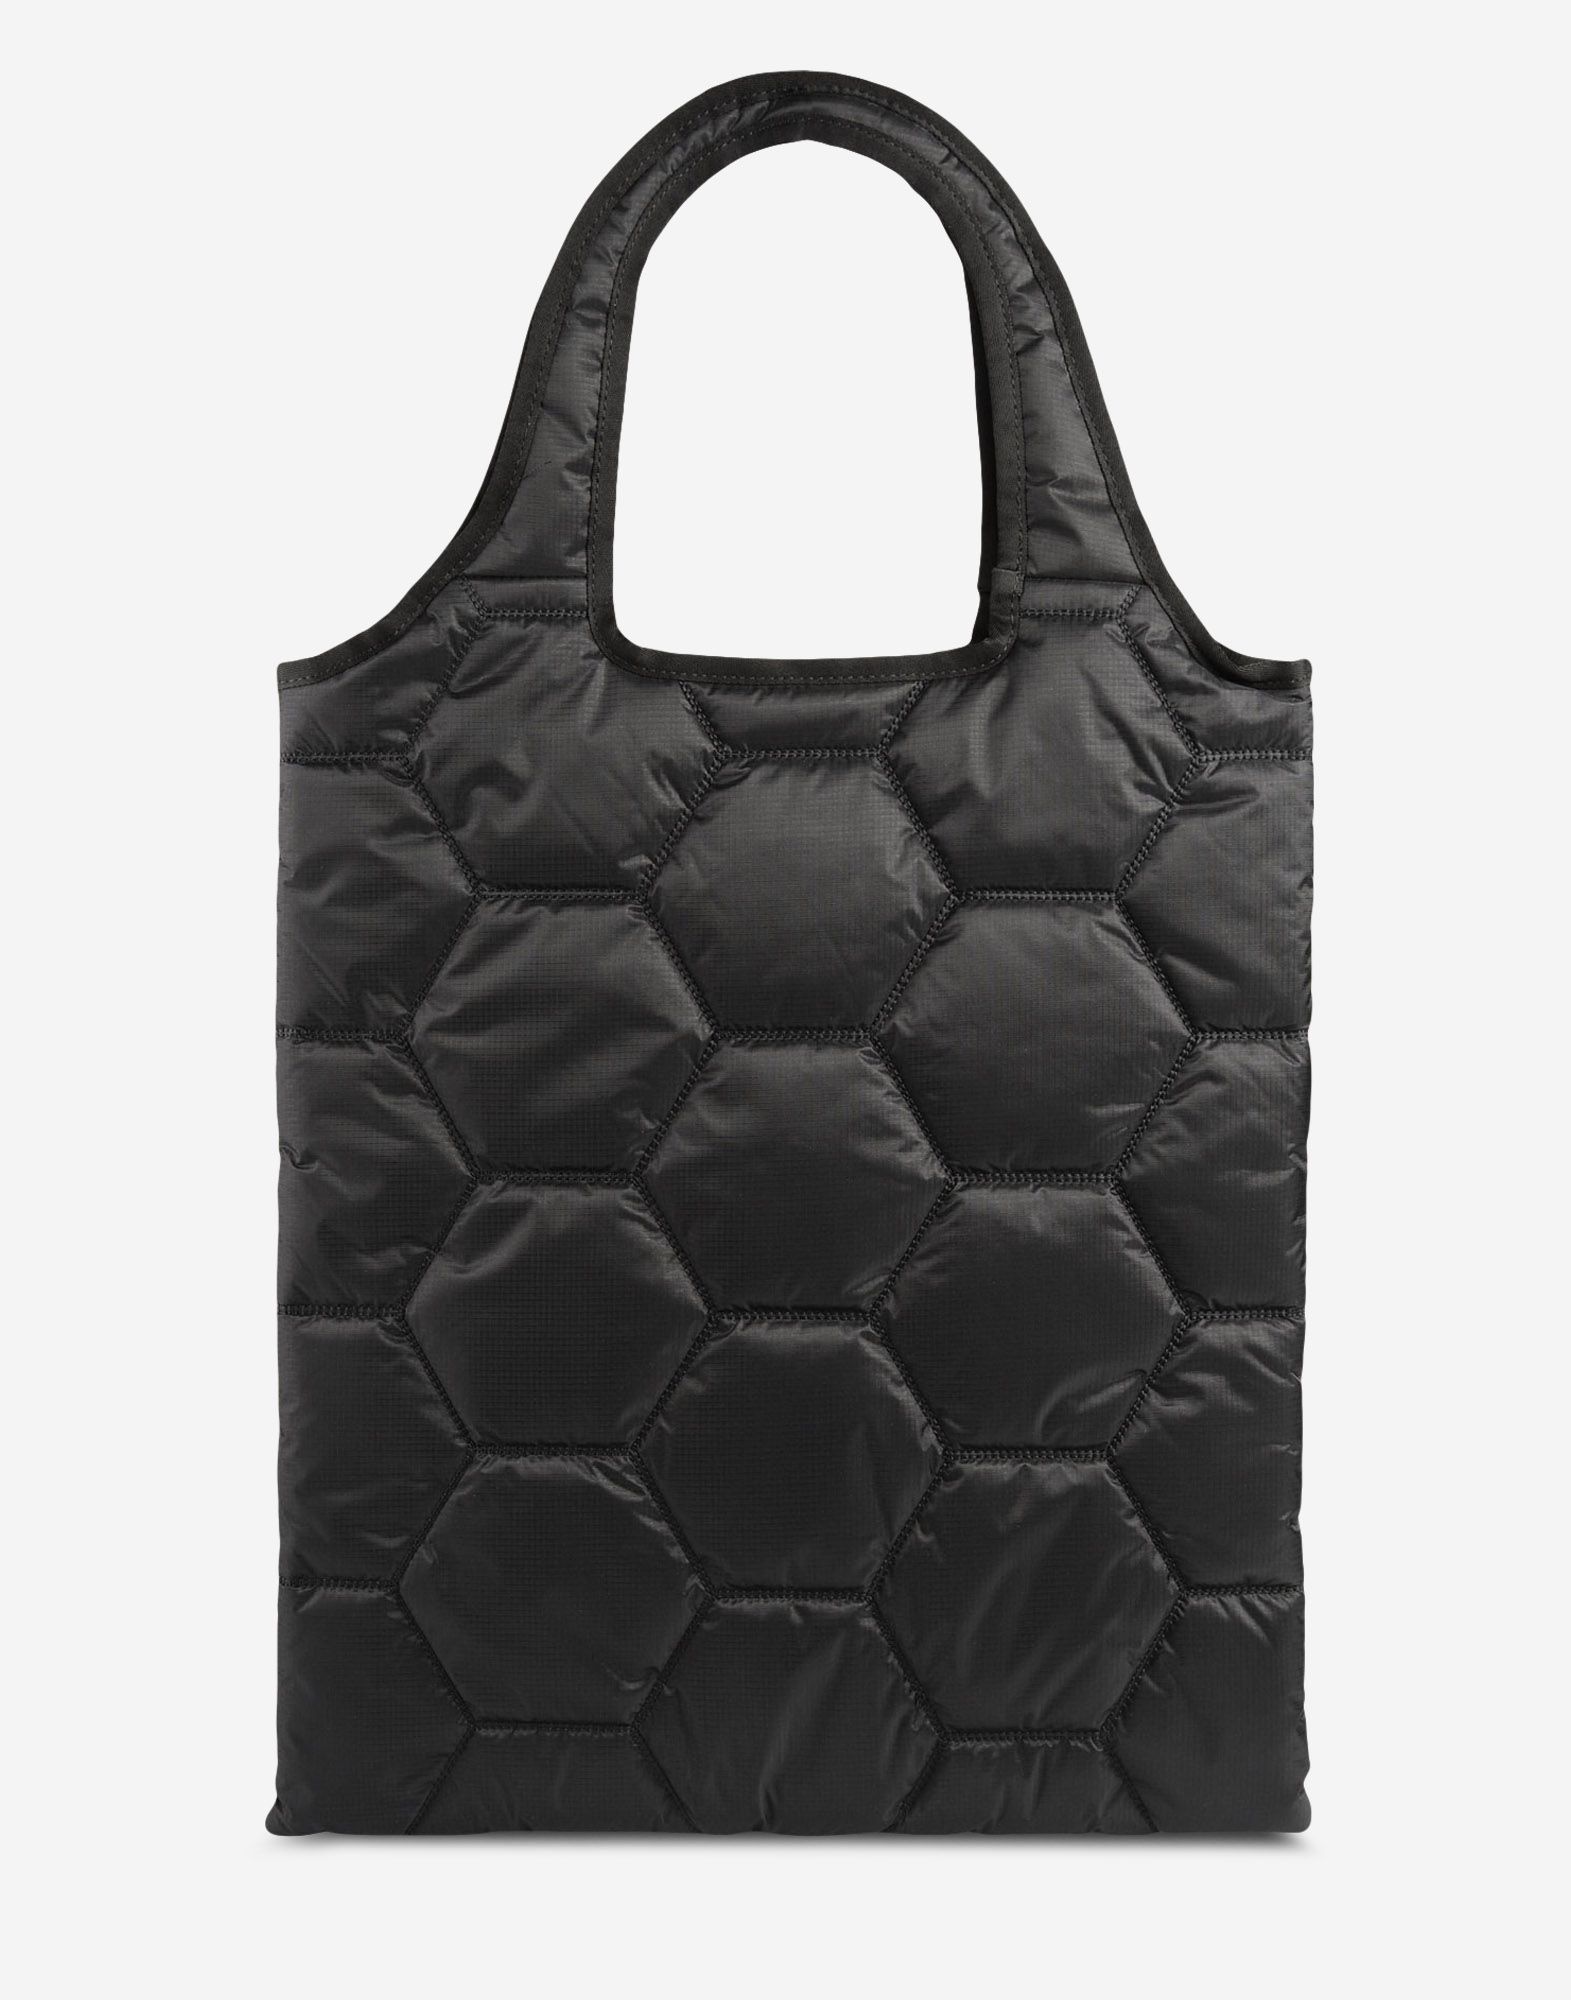 Y 3 Shopper for Women | Adidas Y-3 Official Store